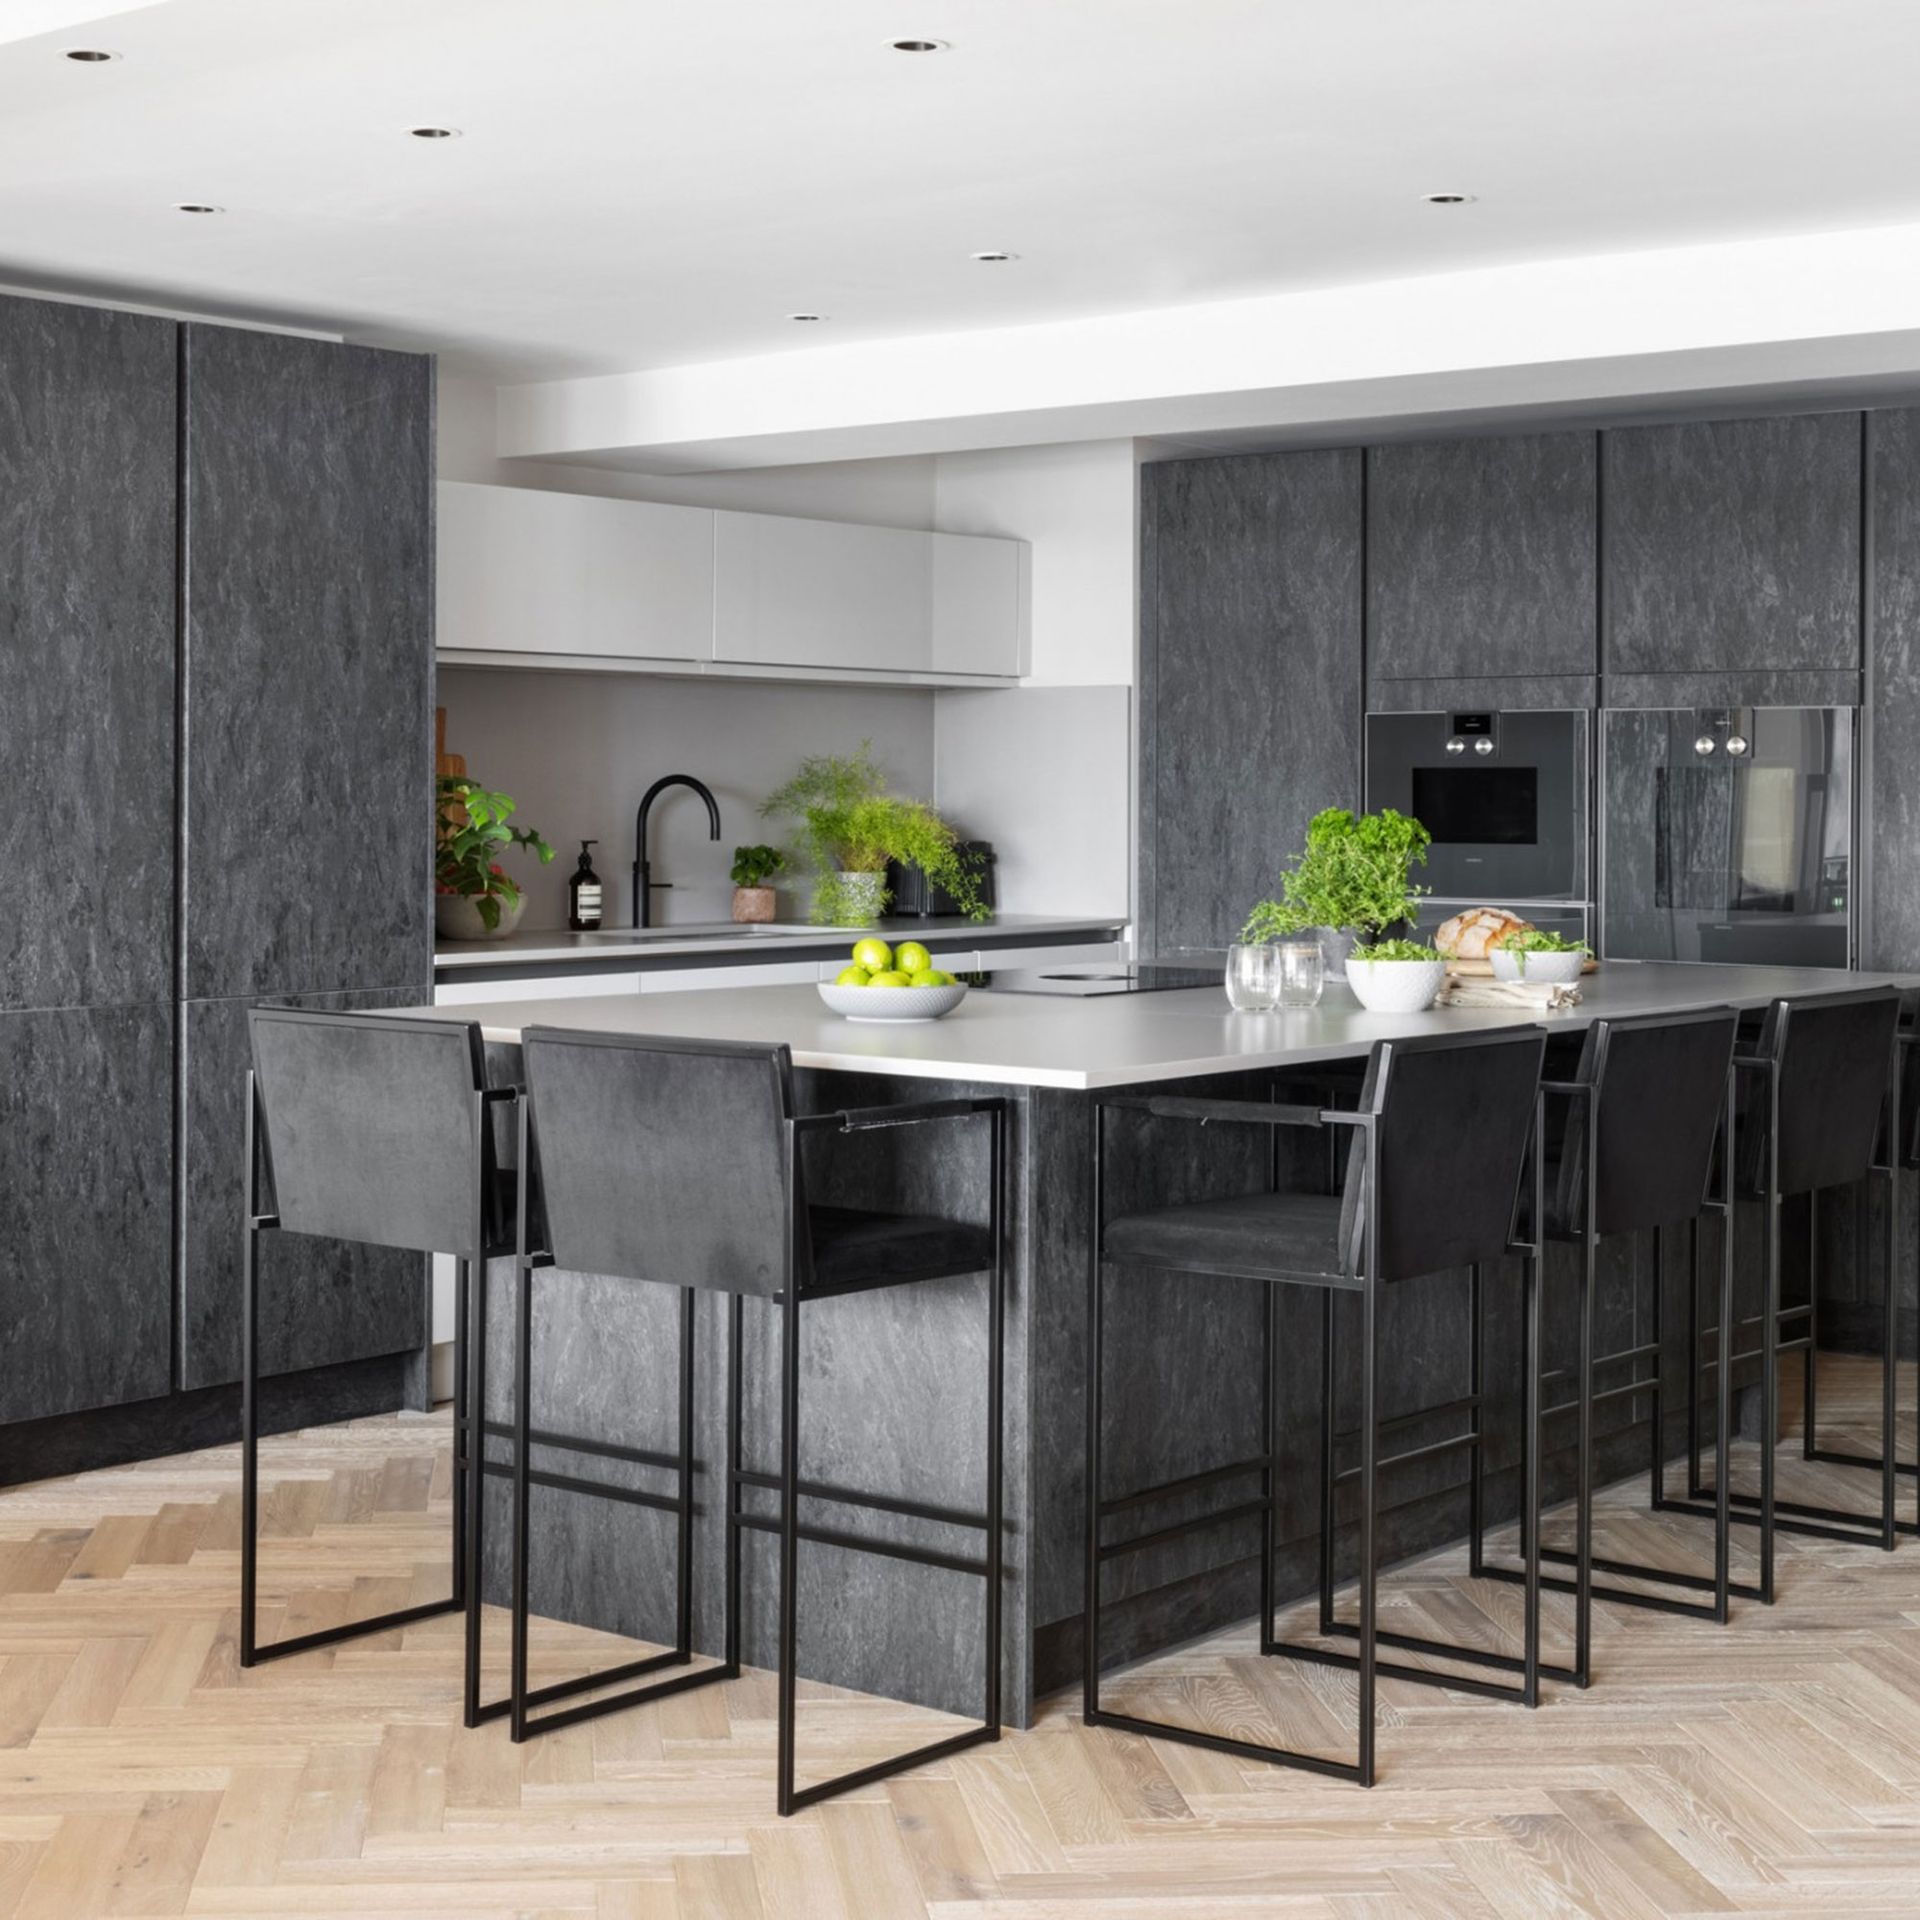 Modern kitchen ideas – transform this key room into a contemporary space